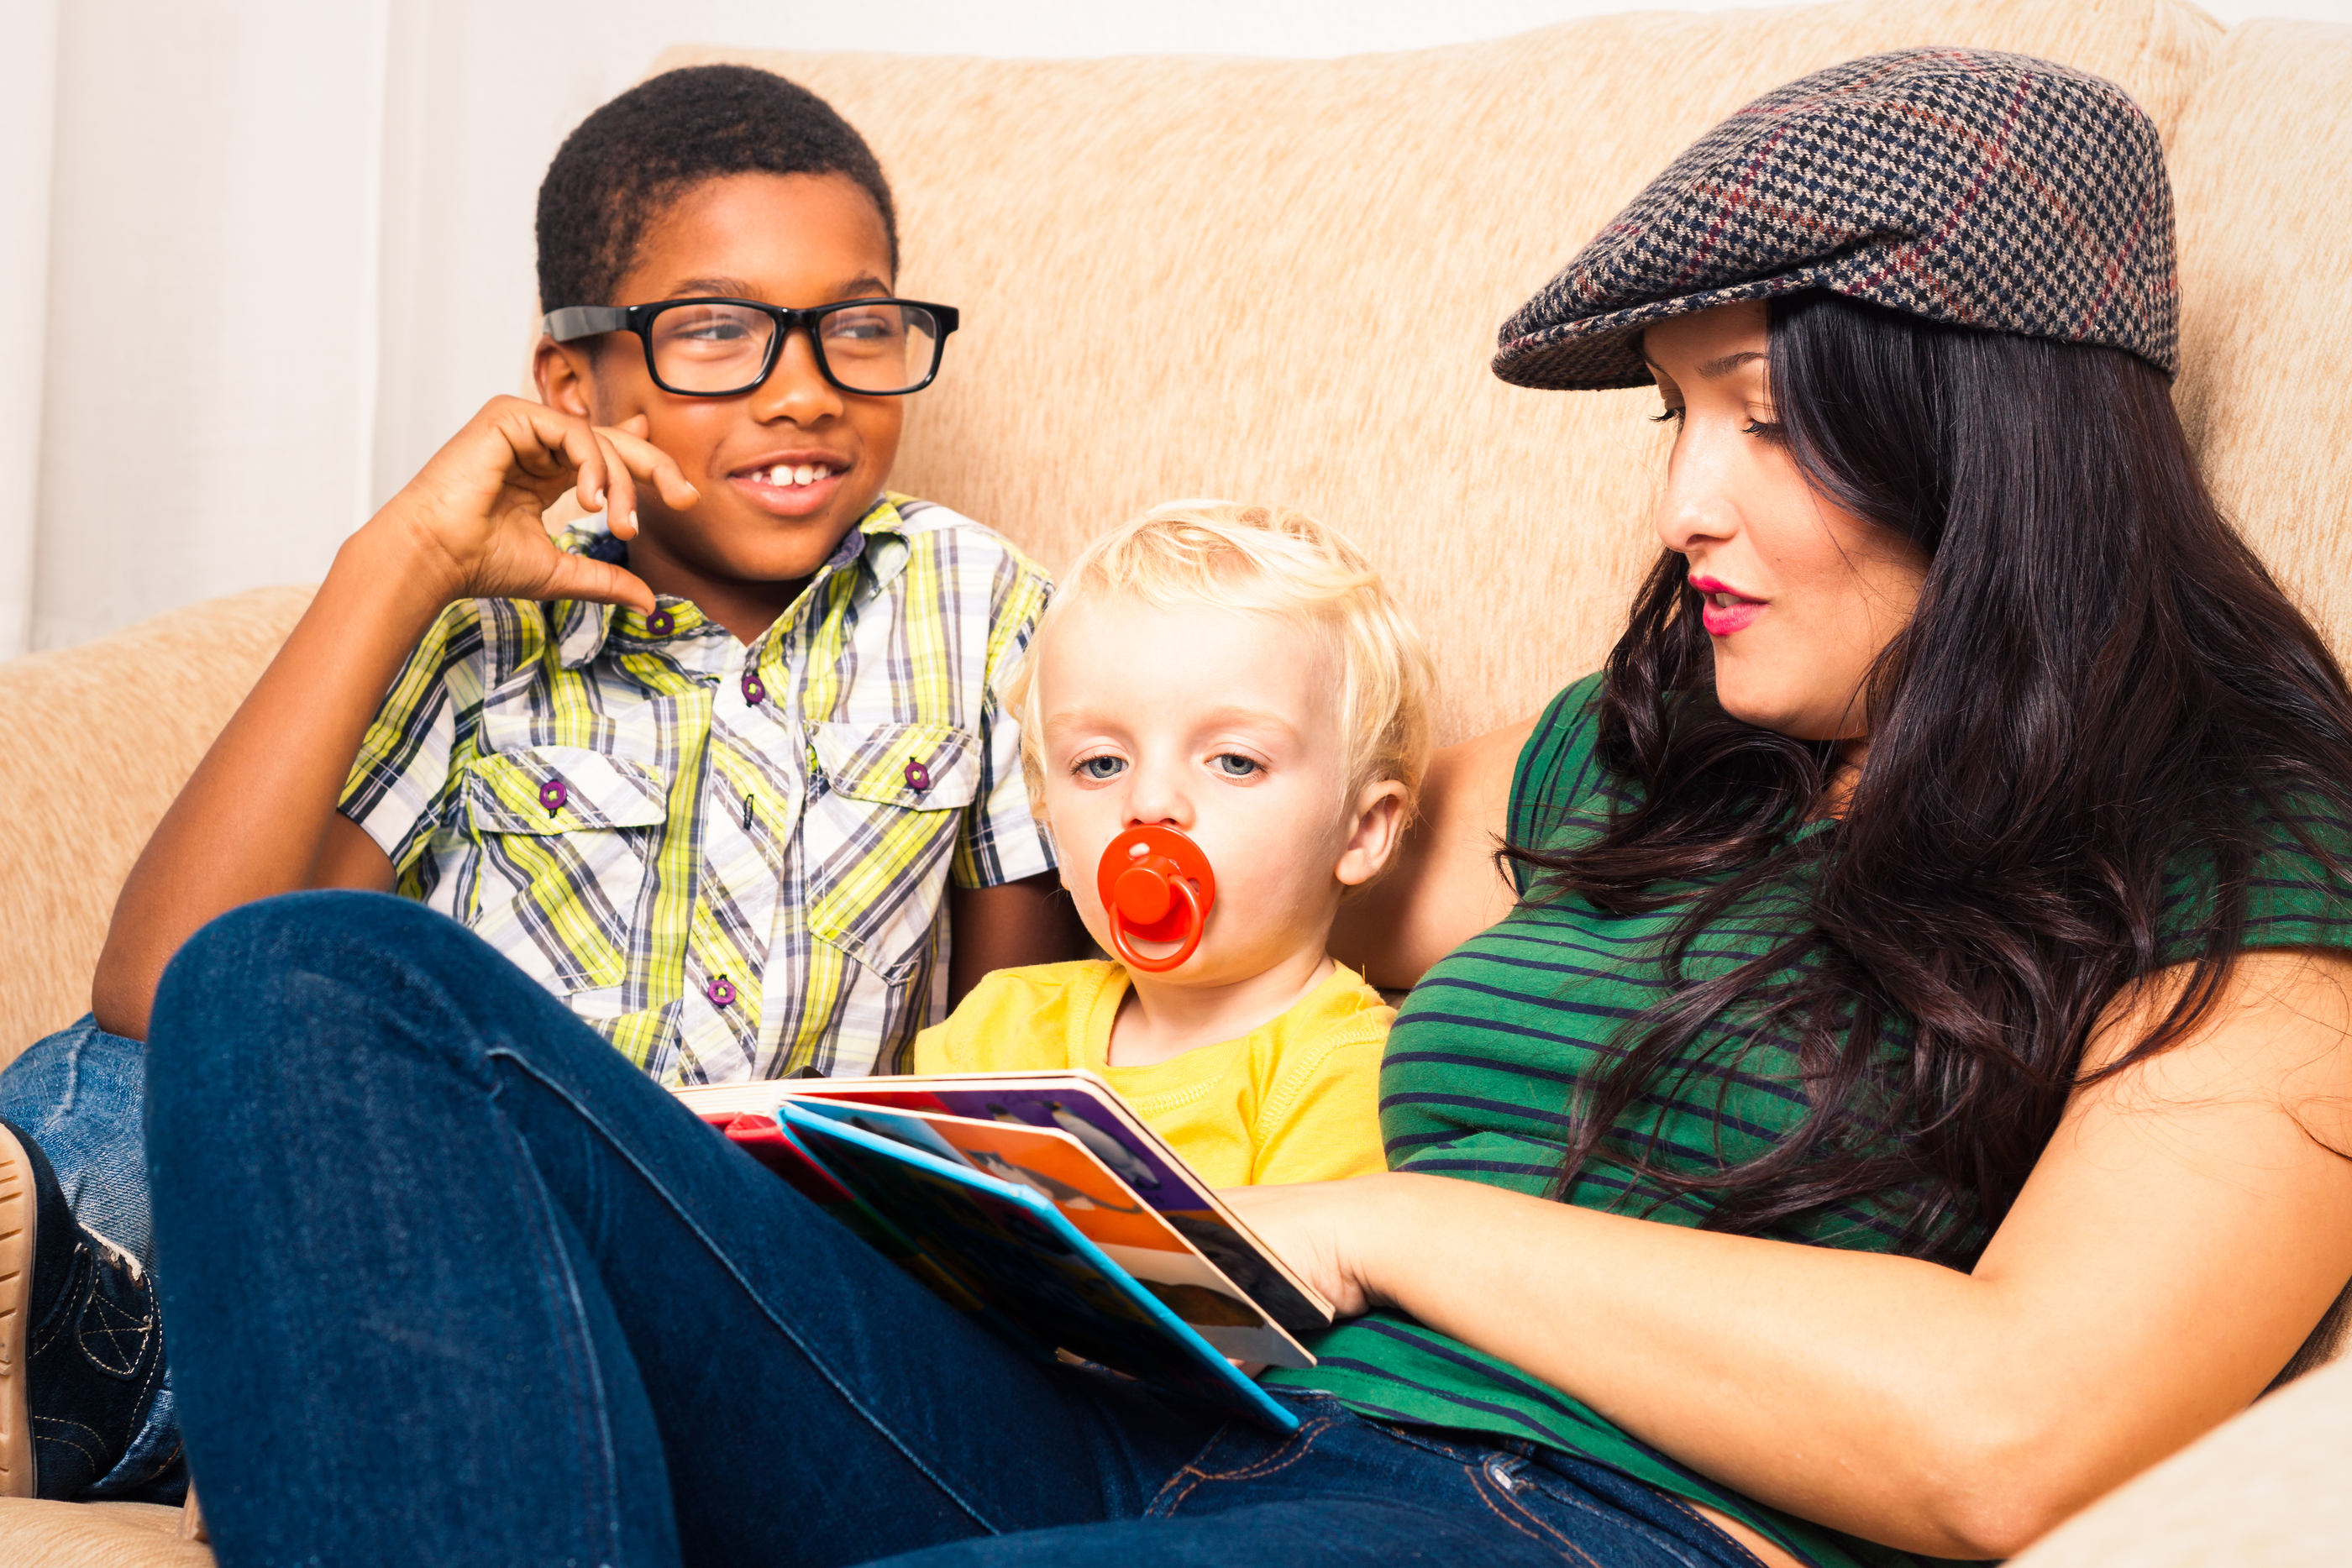 Childcare worker reading to children on the couch